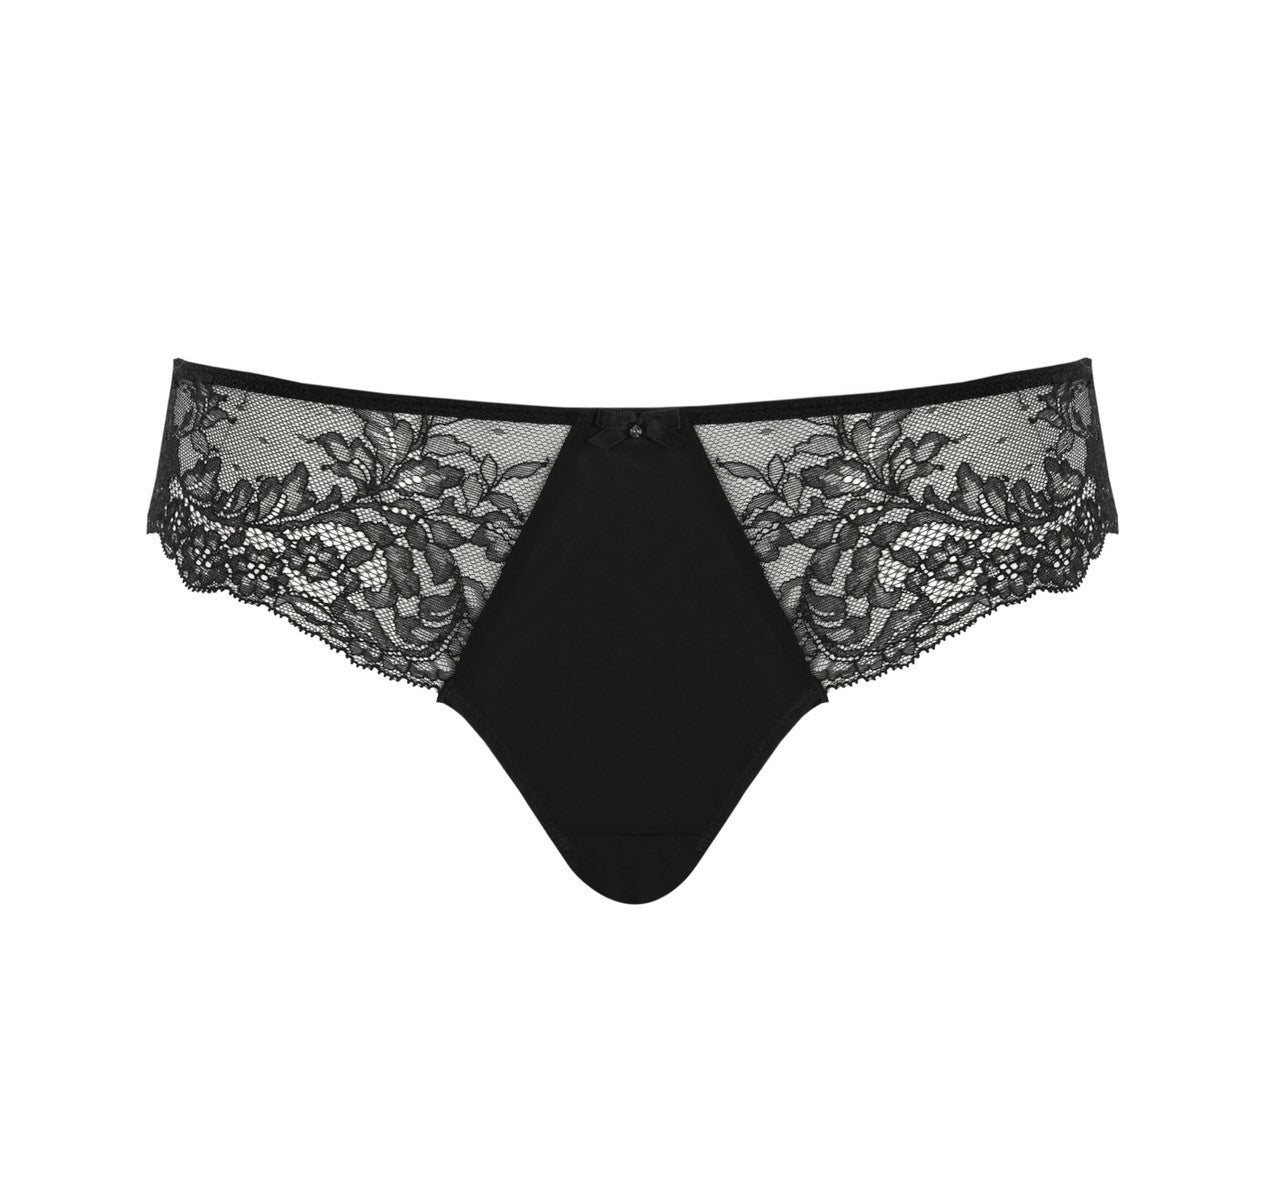 Panache Ana Thong in black stretch lace is shown in a front view product shot.